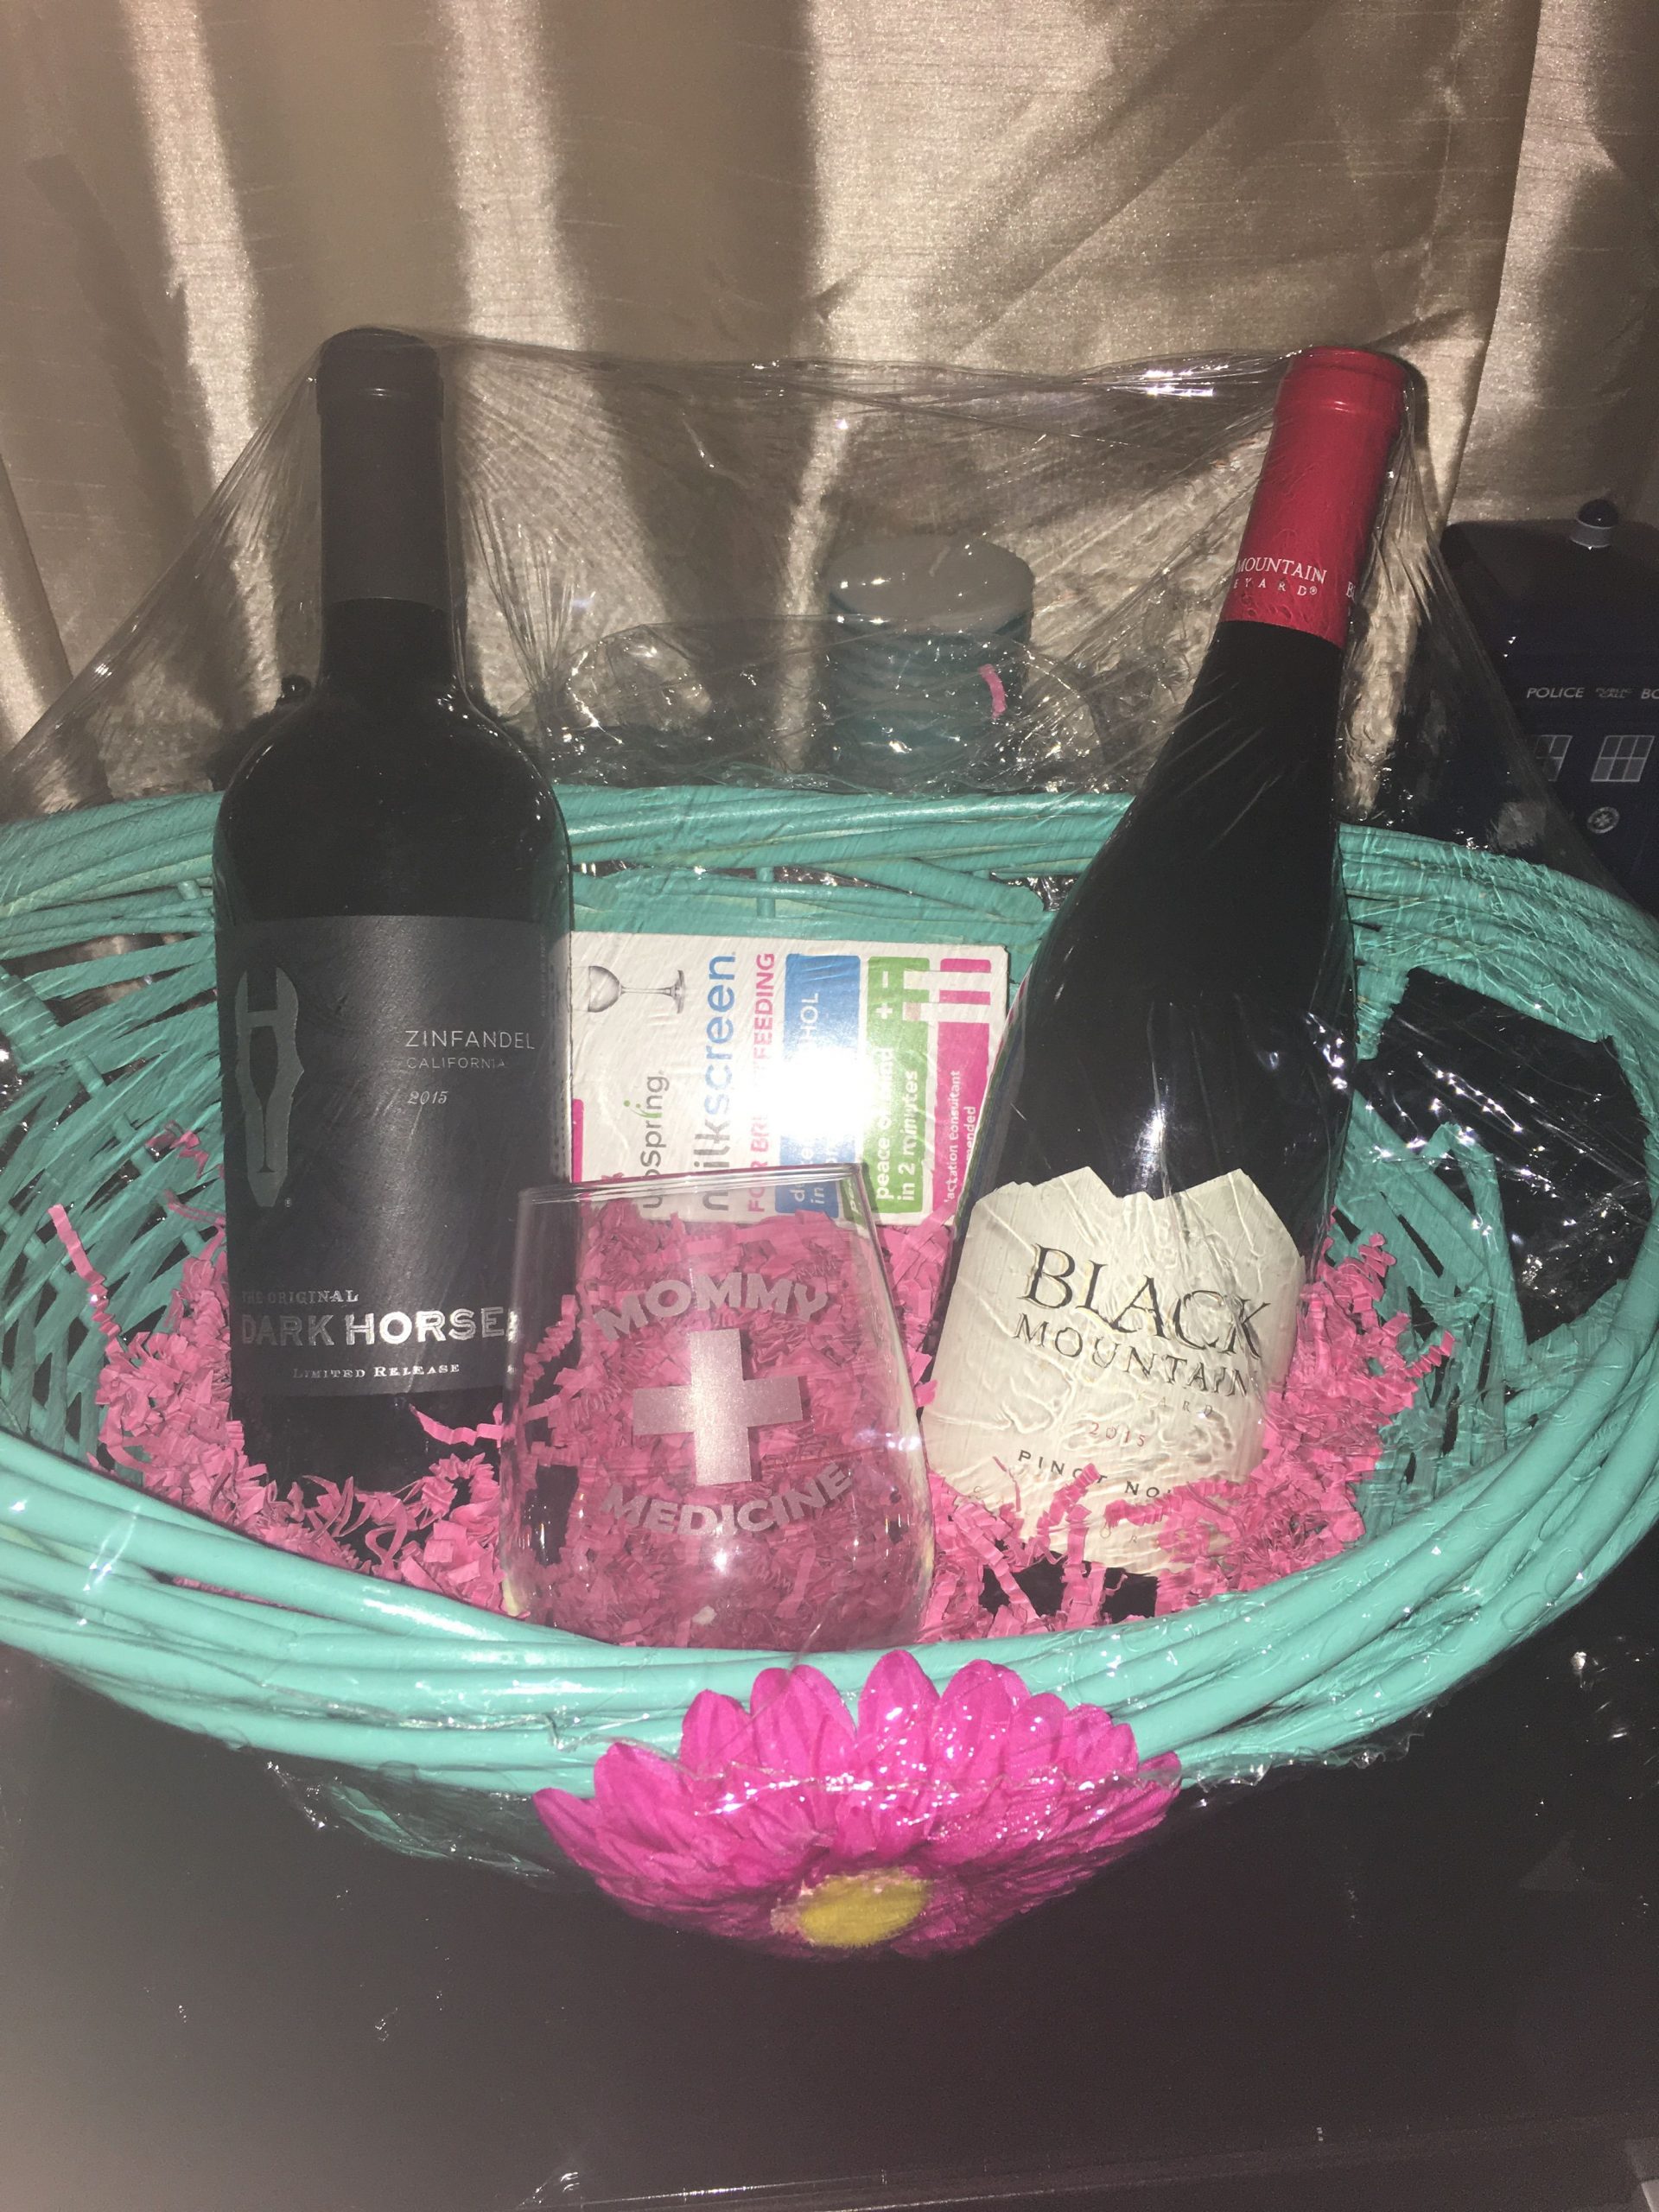 Wine gift basket idea for a brand new mommy!